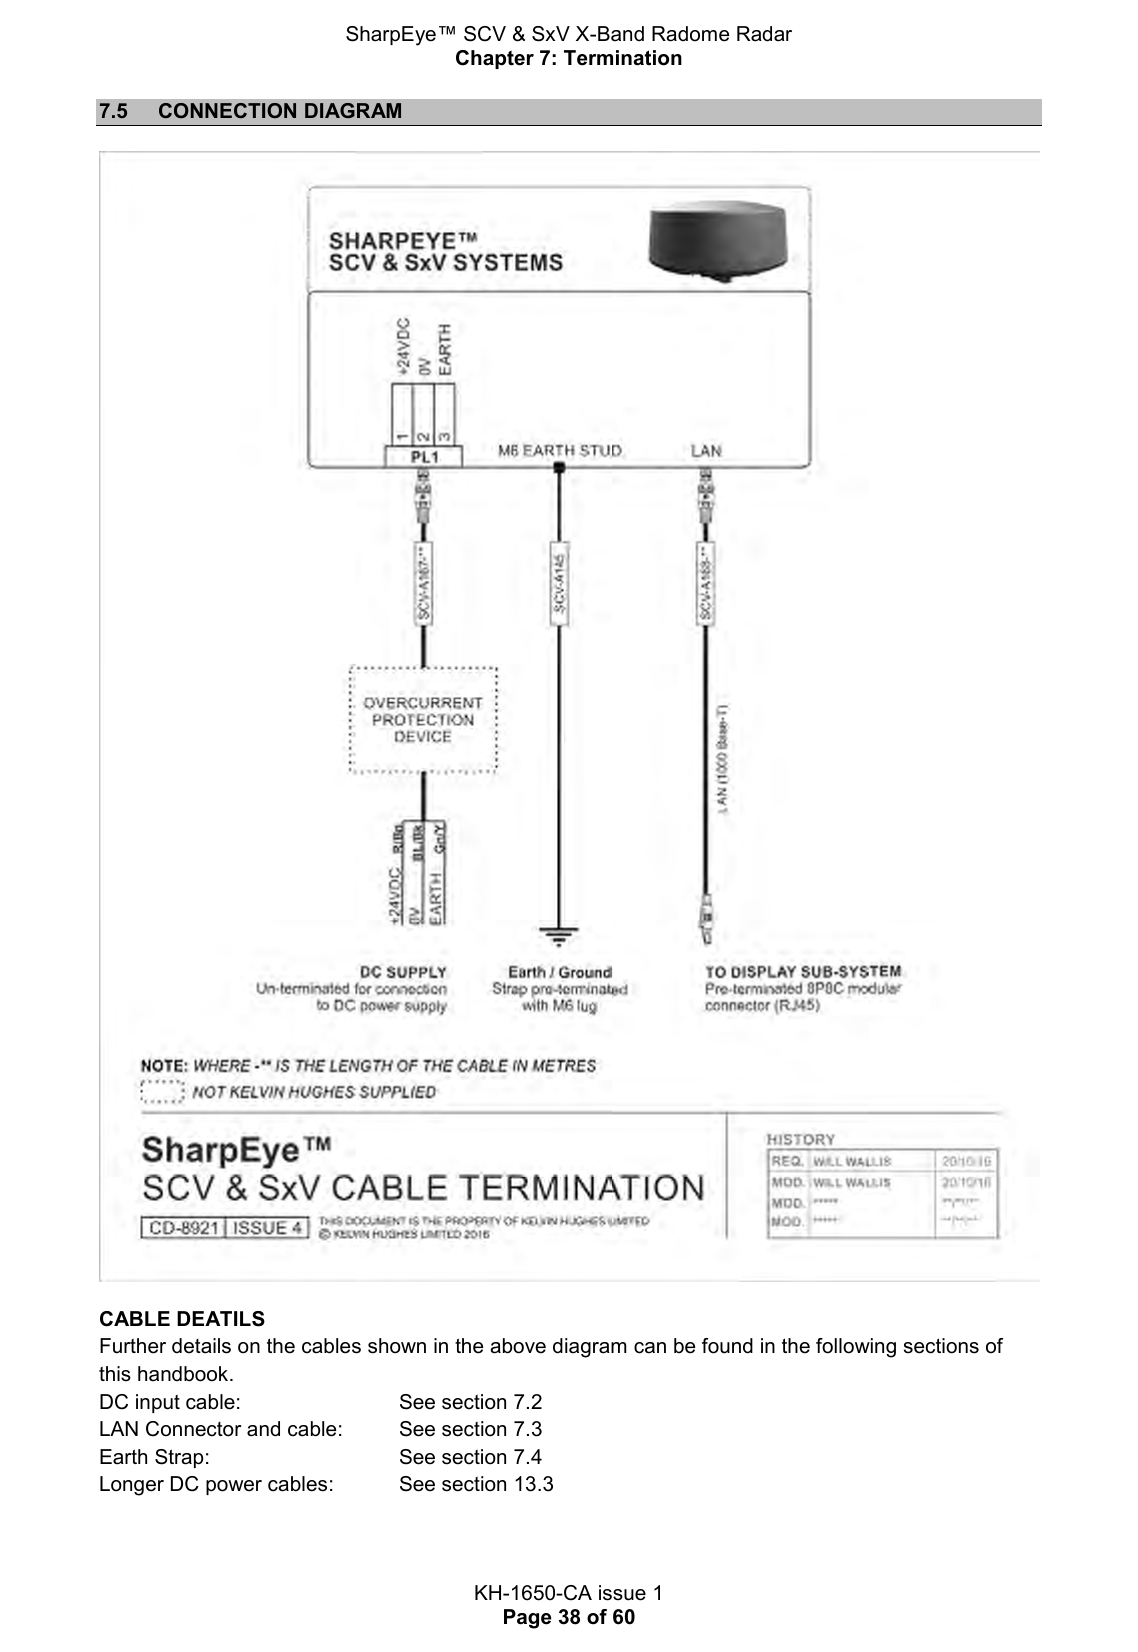 SharpEye™ SCV &amp; SxV X-Band Radome Radar Chapter 7: Termination  KH-1650-CA issue 1 Page 38 of 60 7.5  CONNECTION DIAGRAM  CABLE DEATILS Further details on the cables shown in the above diagram can be found in the following sections of this handbook. DC input cable:     See section 7.2 LAN Connector and cable:   See section 7.3 Earth Strap:      See section 7.4 Longer DC power cables:  See section 13.3    